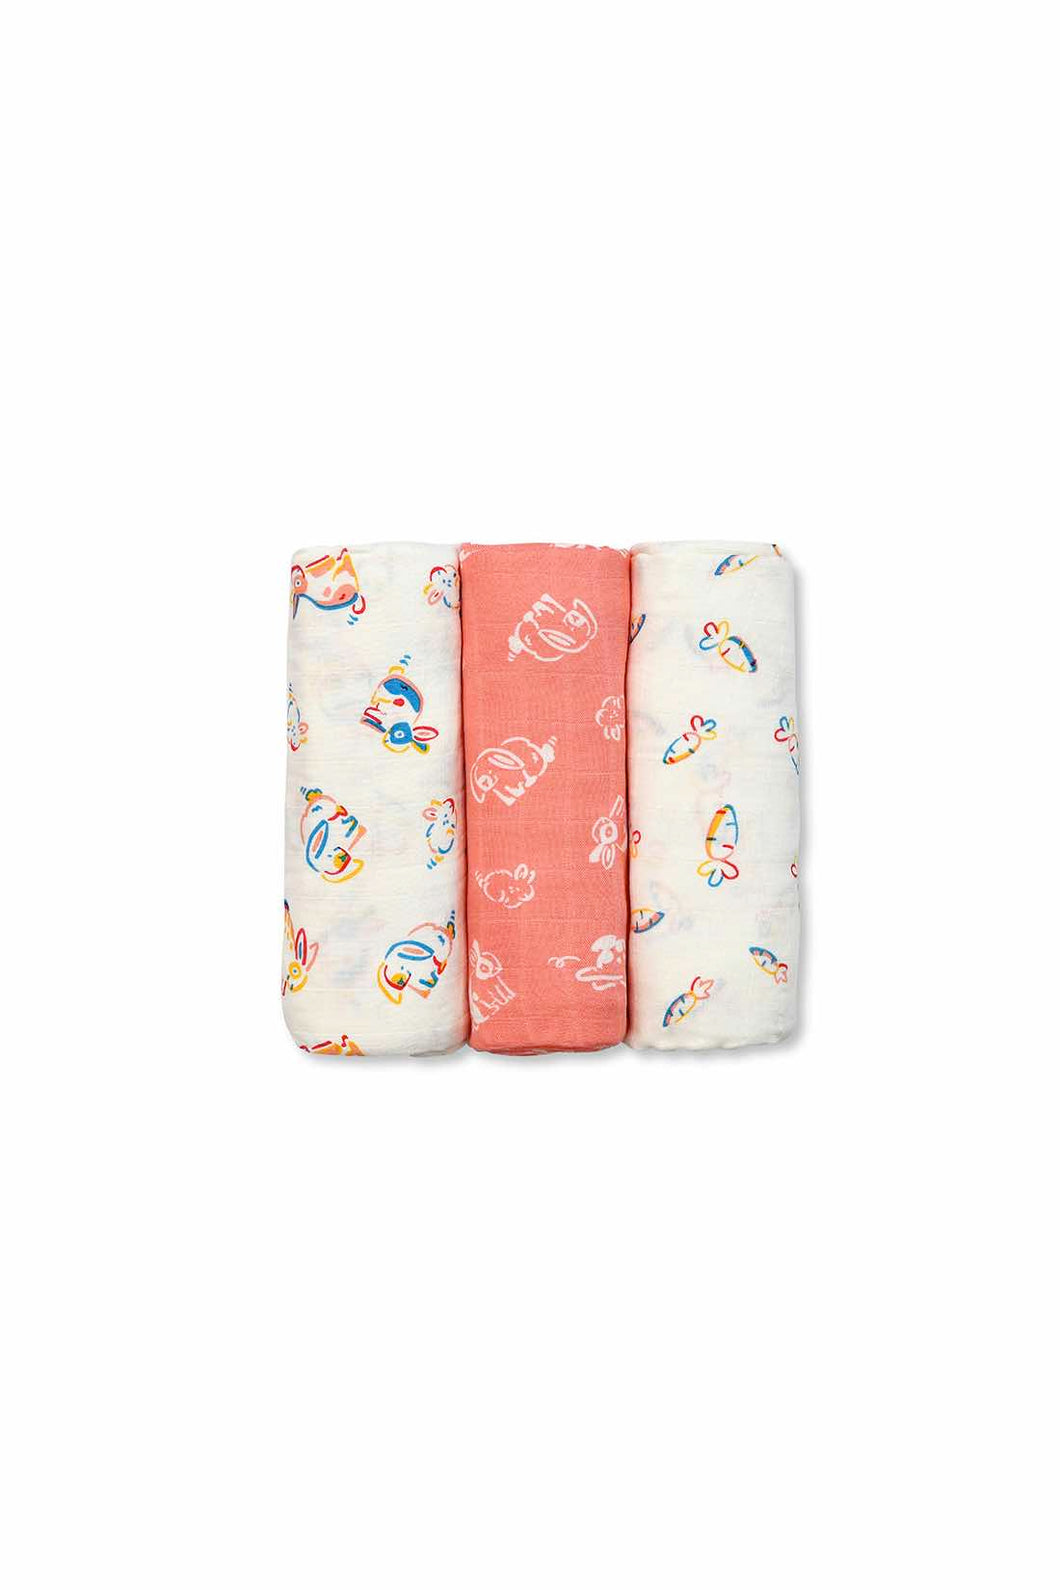 Not Too Big Bunny Bamboo Swaddles 3 Pack 1